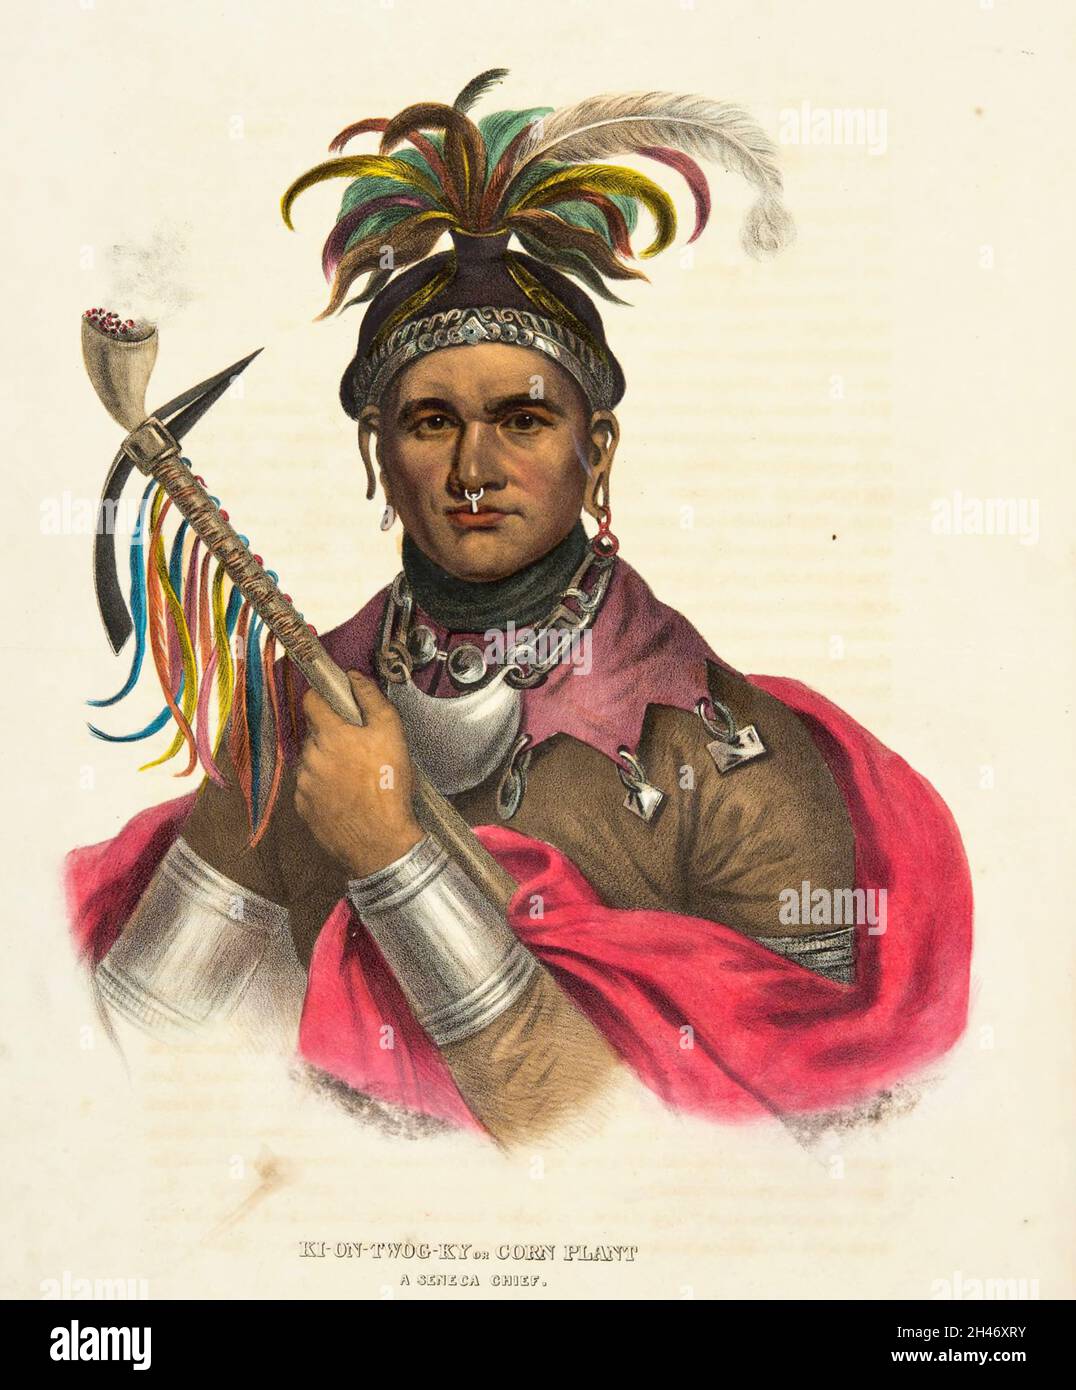 Kiontwogky or Corn Plant a Seneca Chief with Peace Pipe from the book ' History of the Indian Tribes of North America with biographical sketches and anecdotes of the principal chiefs. ' Volume 1 of 3 by Thomas Loraine,McKenney and James Hall Esq. Published in 1838 Stock Photo